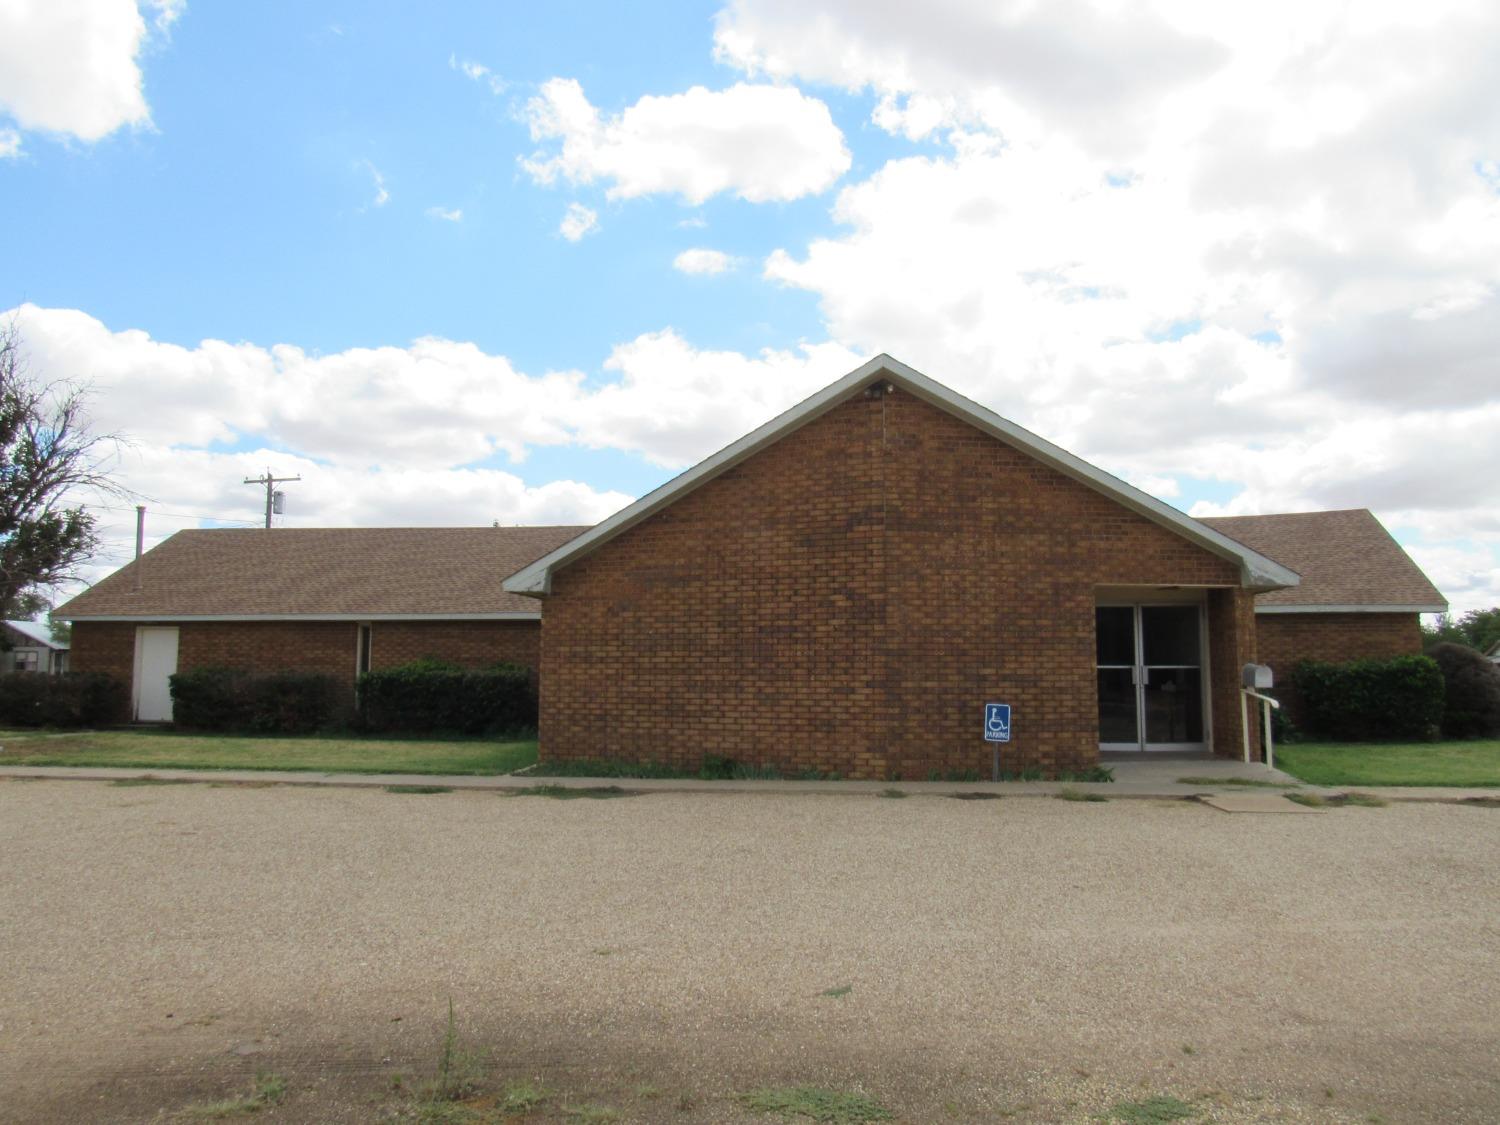 Does your congregation need a new home? Excellently maintained brick church building available with sanctuary, baptistry, kitchen, fellowship hall, office/library, rest rooms, central heat and air conditioning